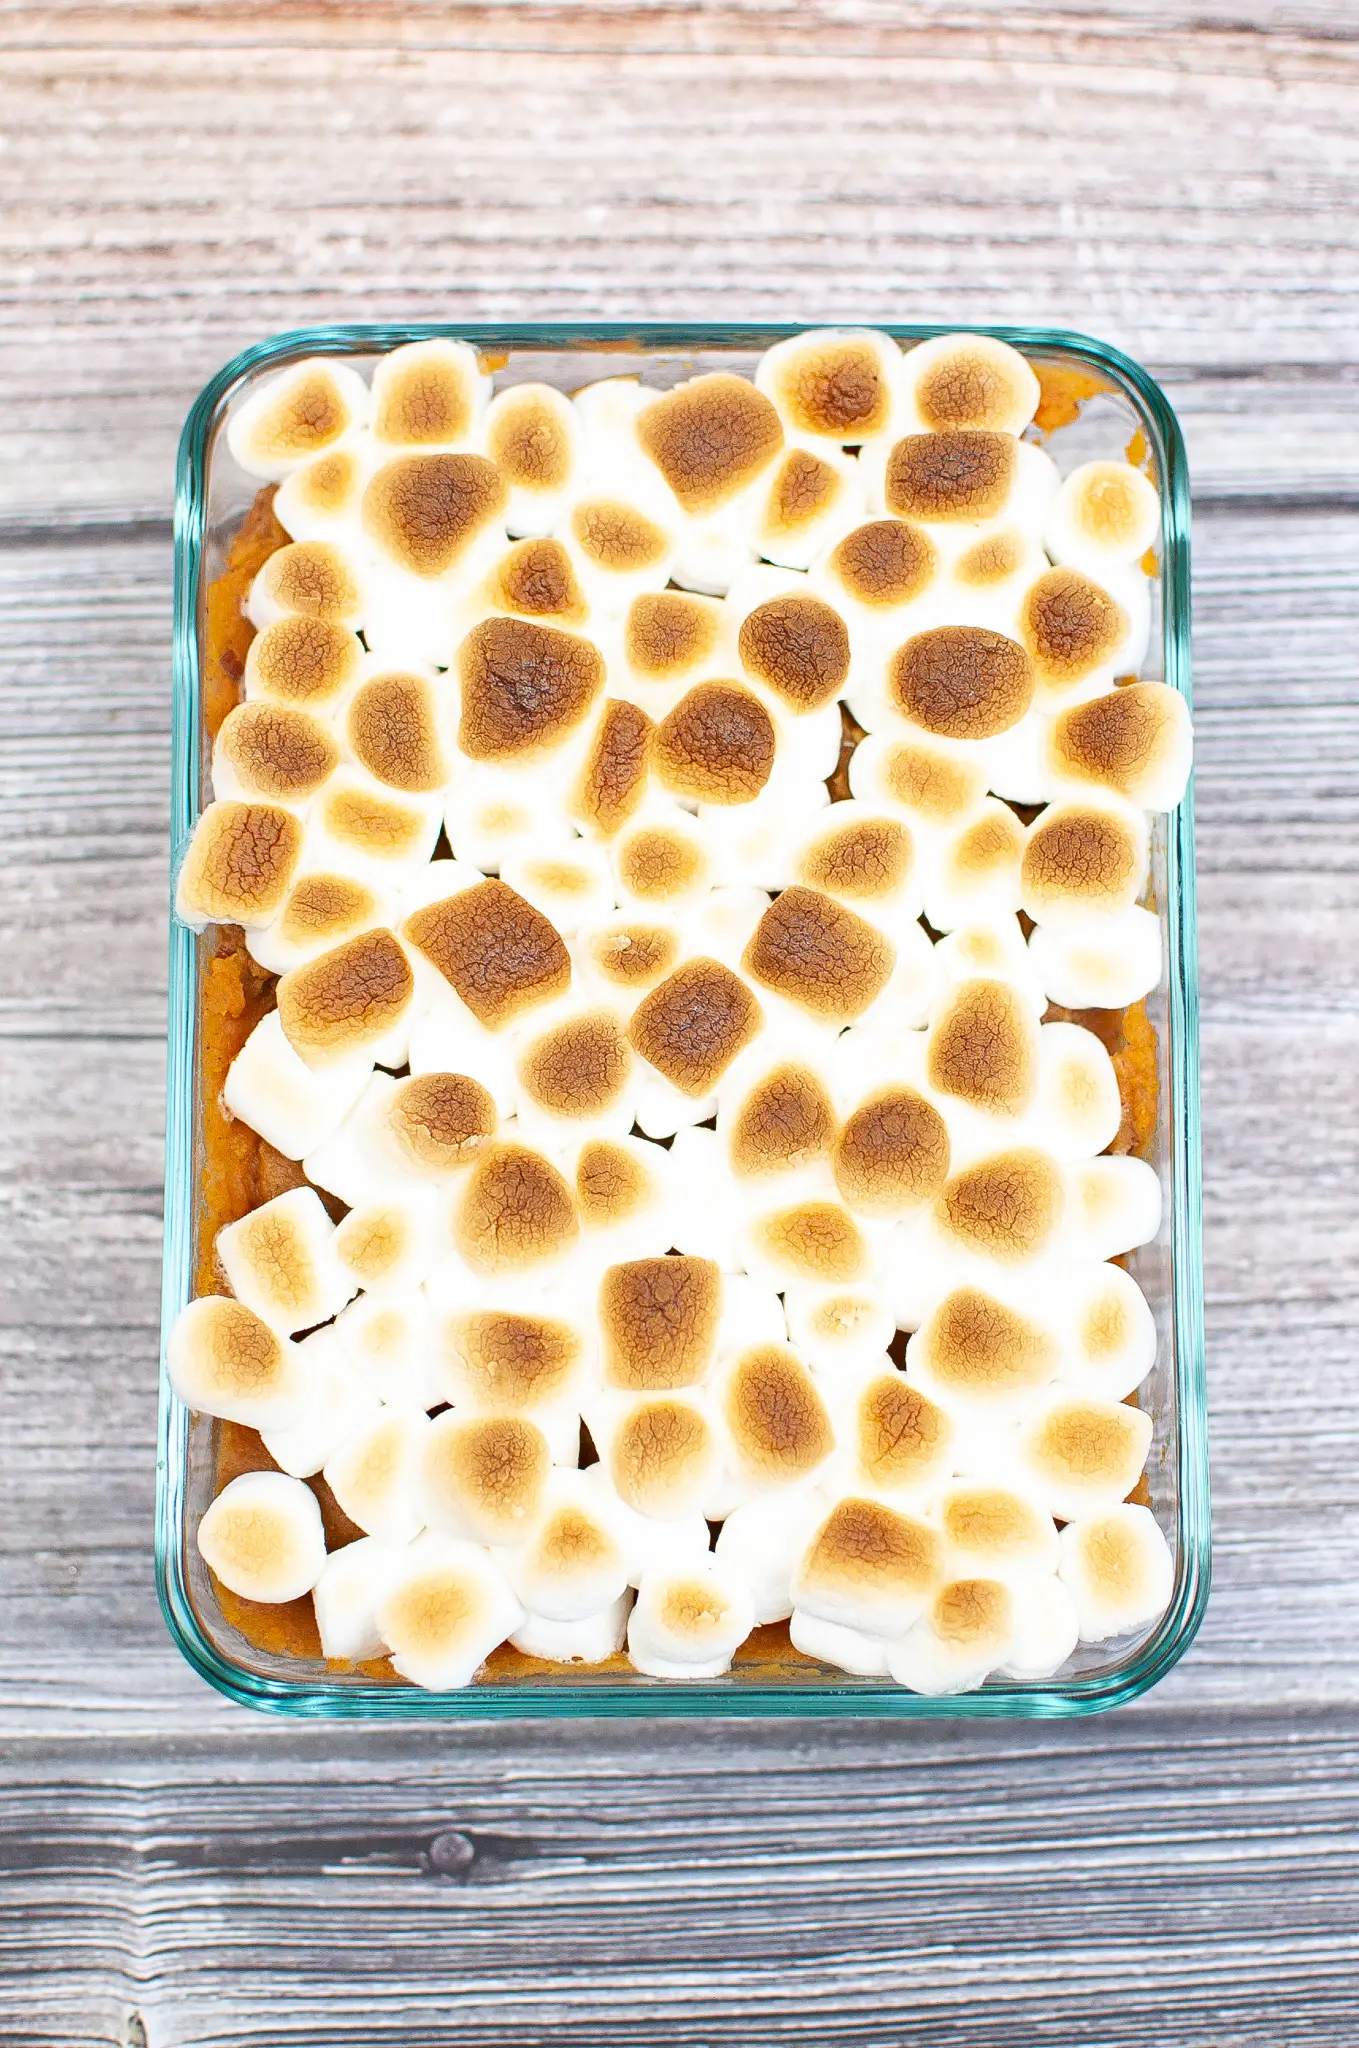 Sweet potato casserole cooked, and marshmallows toasted.